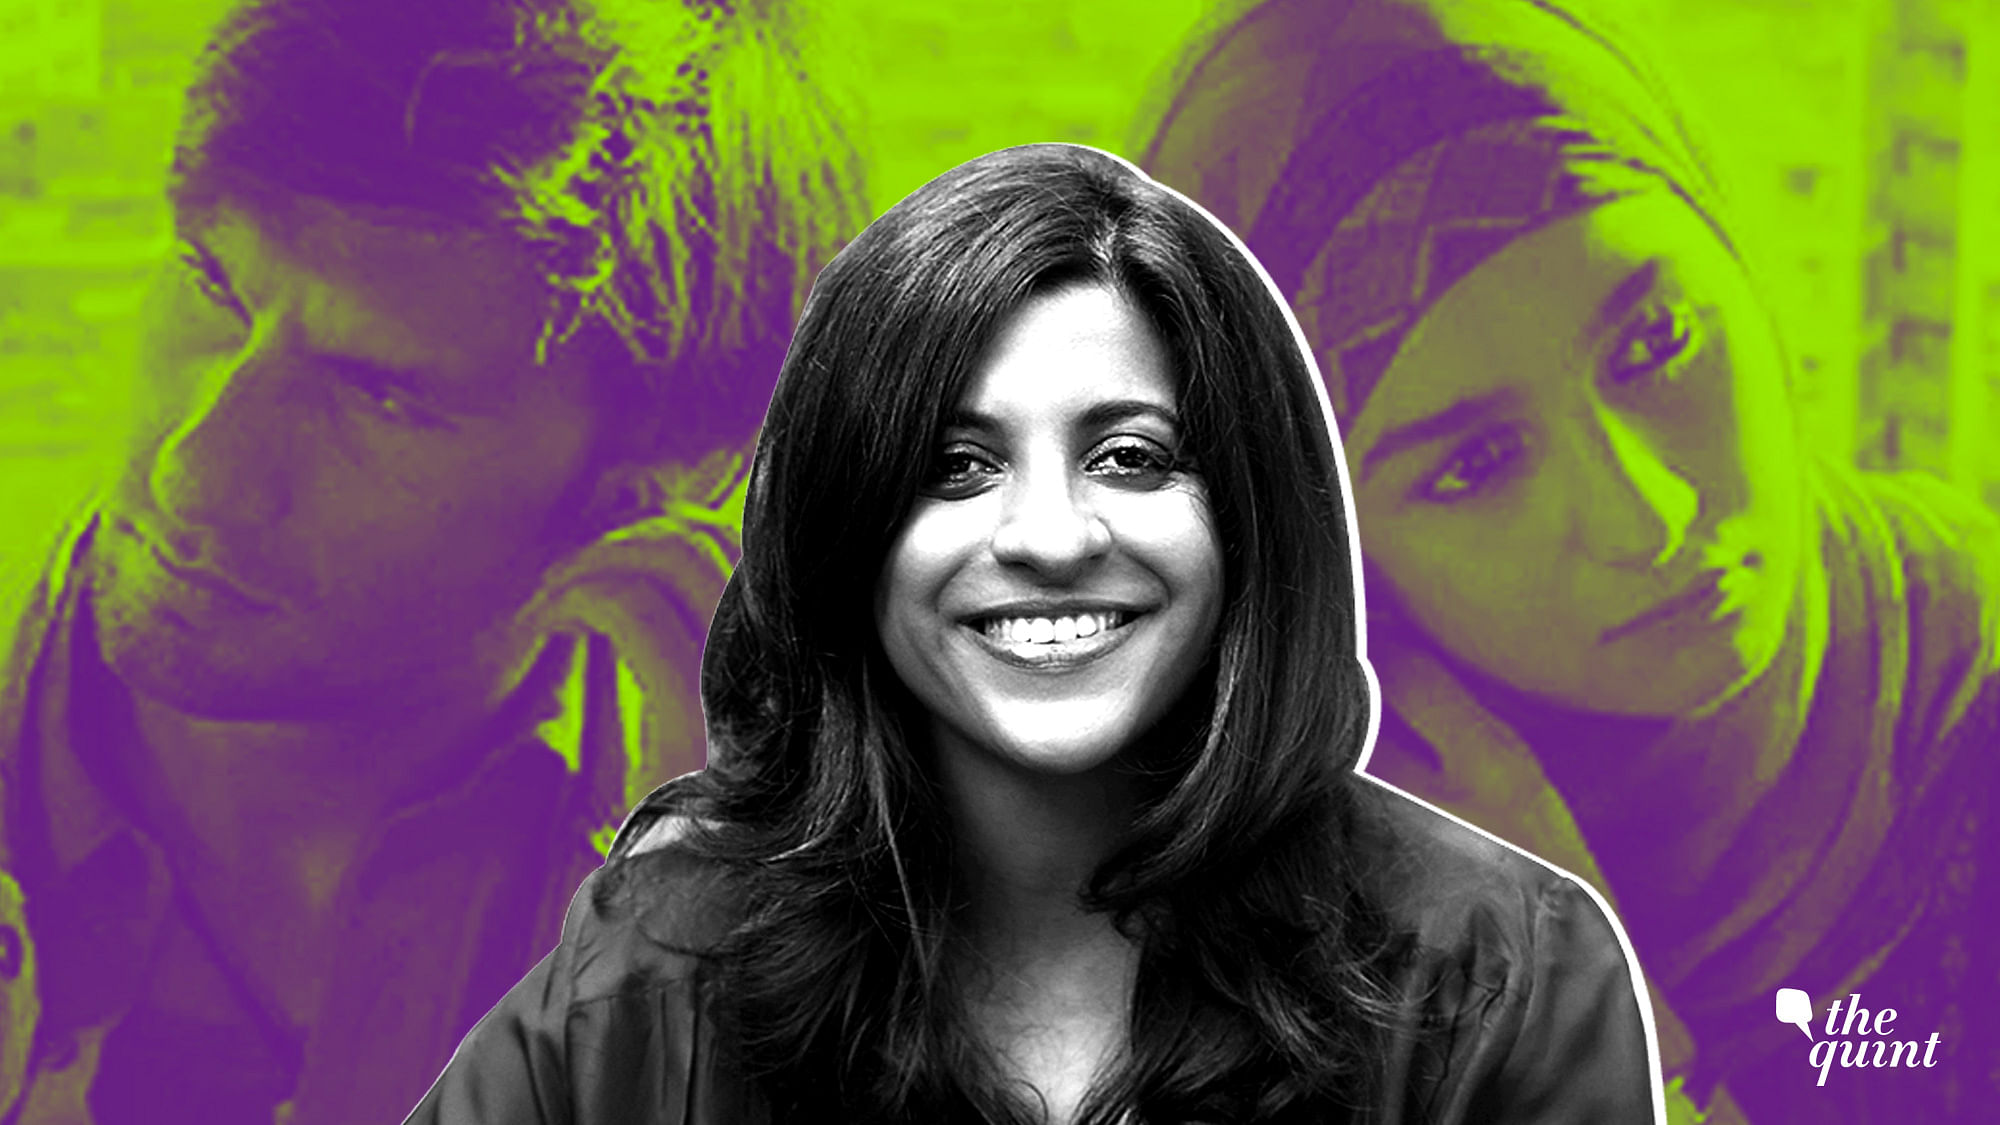 The Quint team has an informal chat with Zoya Akhtar, about the problems people had with the film.